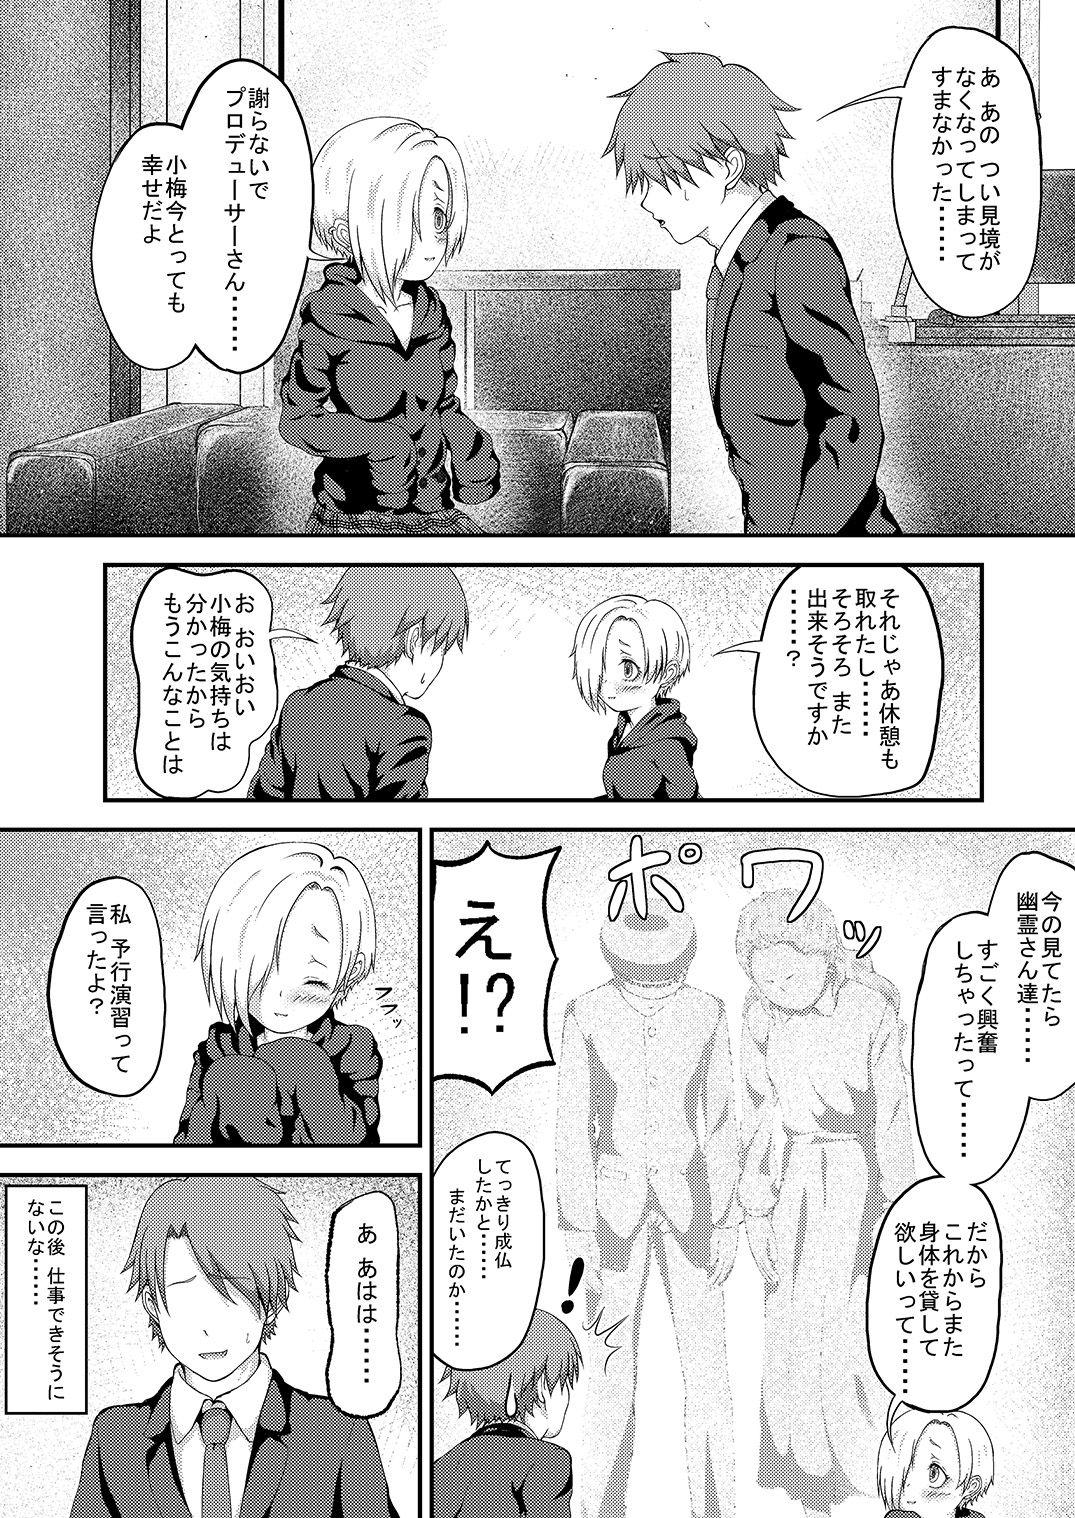 Dicks The H-aunting of Koume-chan - The idolmaster Mamada - Page 22